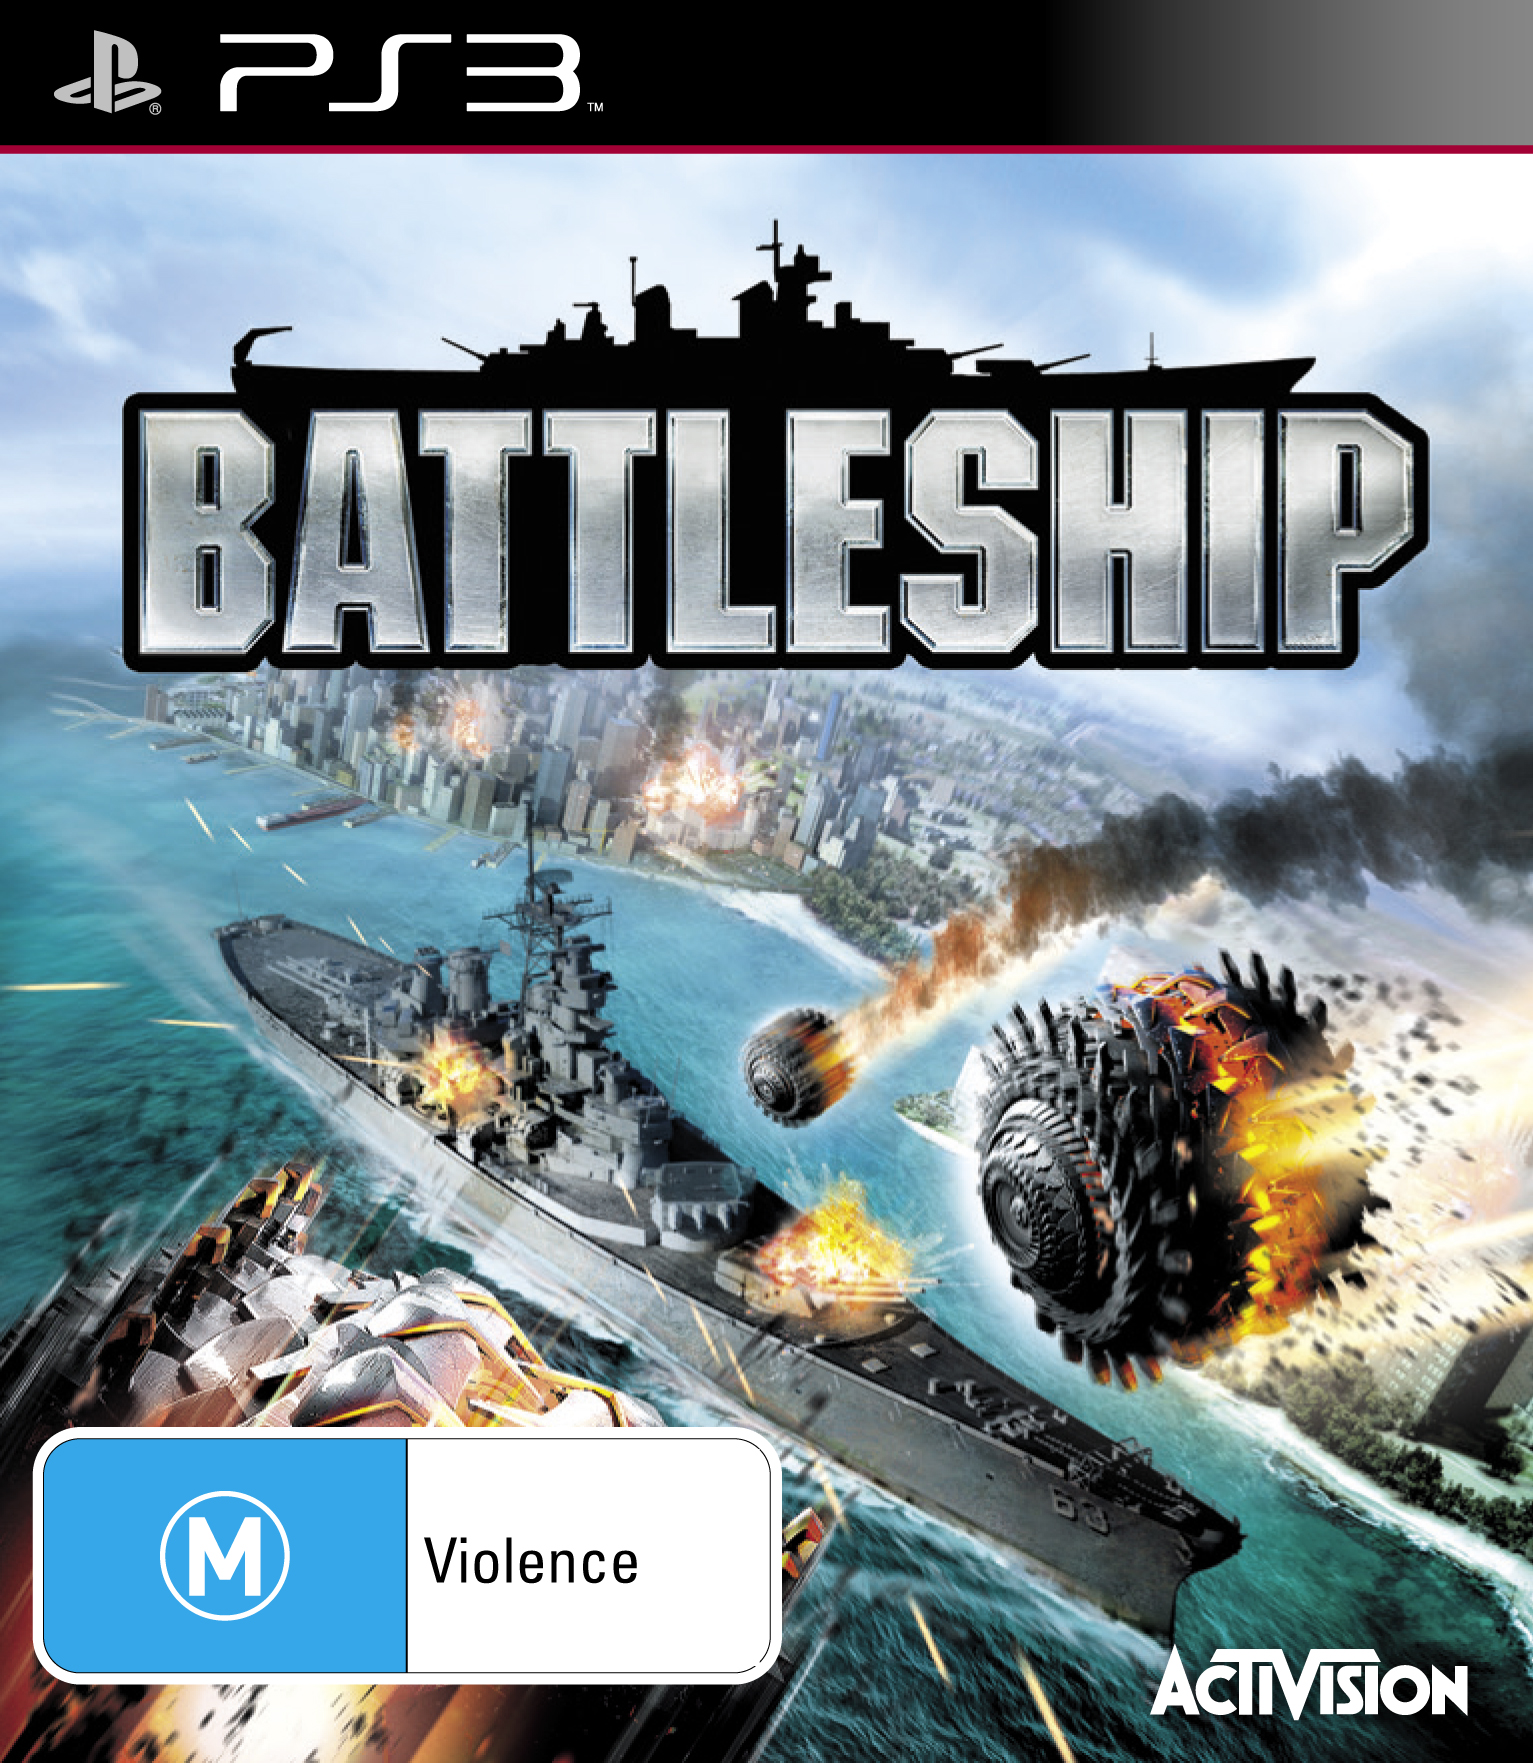 Battleship competition winners announced